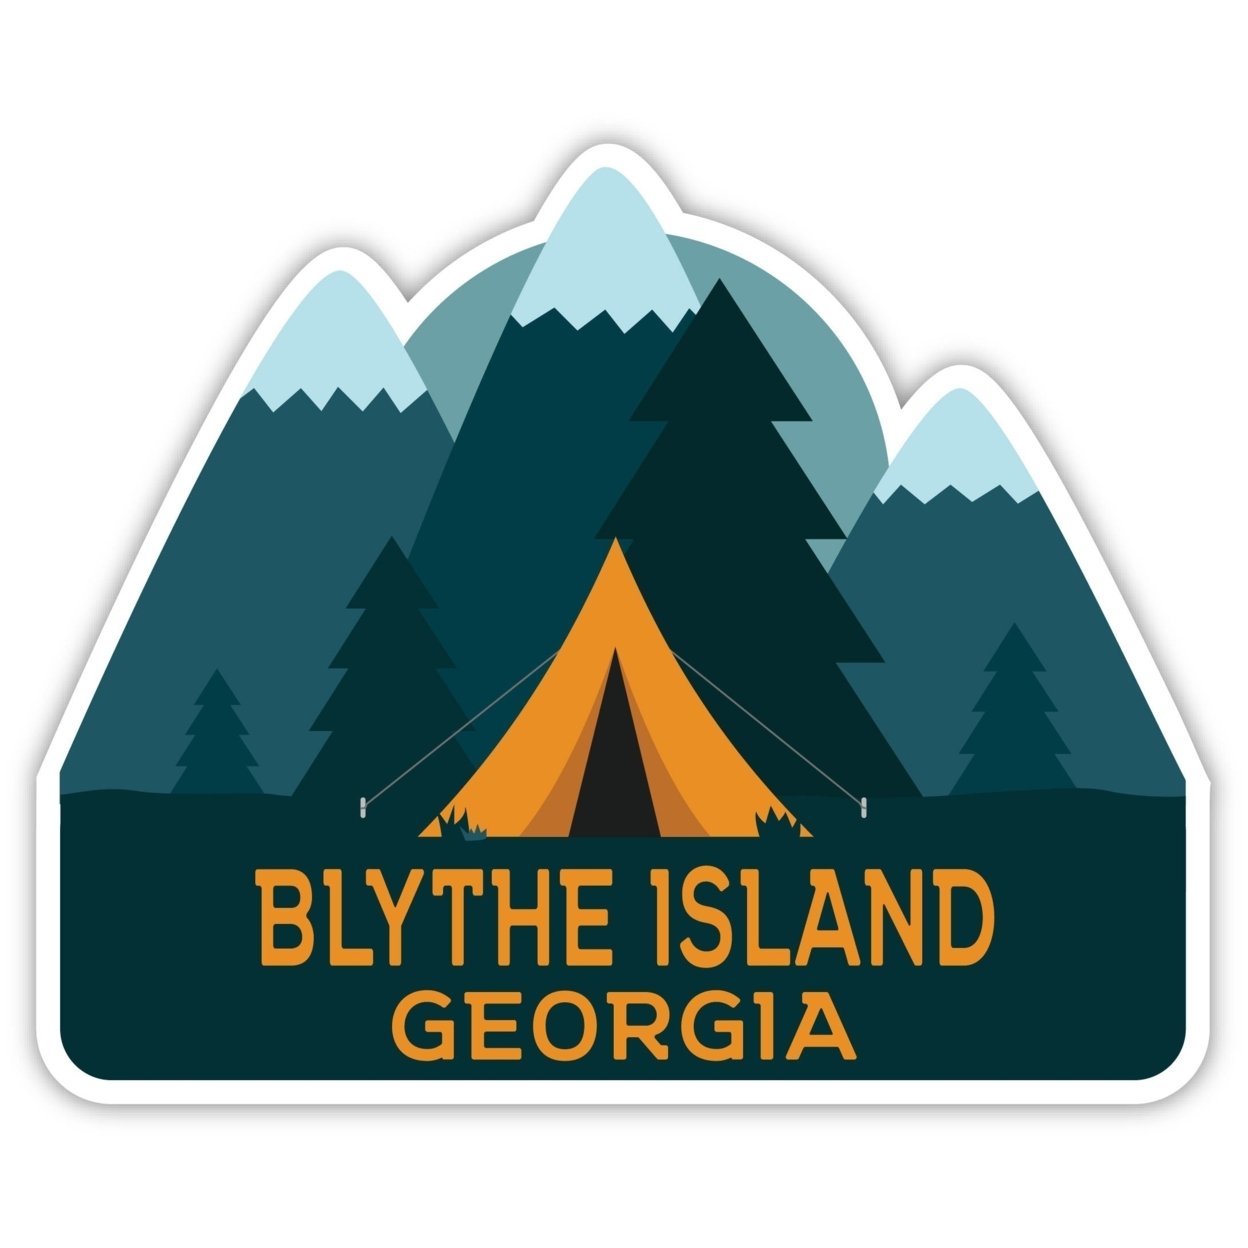 Blythe Island Georgia Souvenir Decorative Stickers (Choose Theme And Size) - 4-Pack, 2-Inch, Great Outdoors